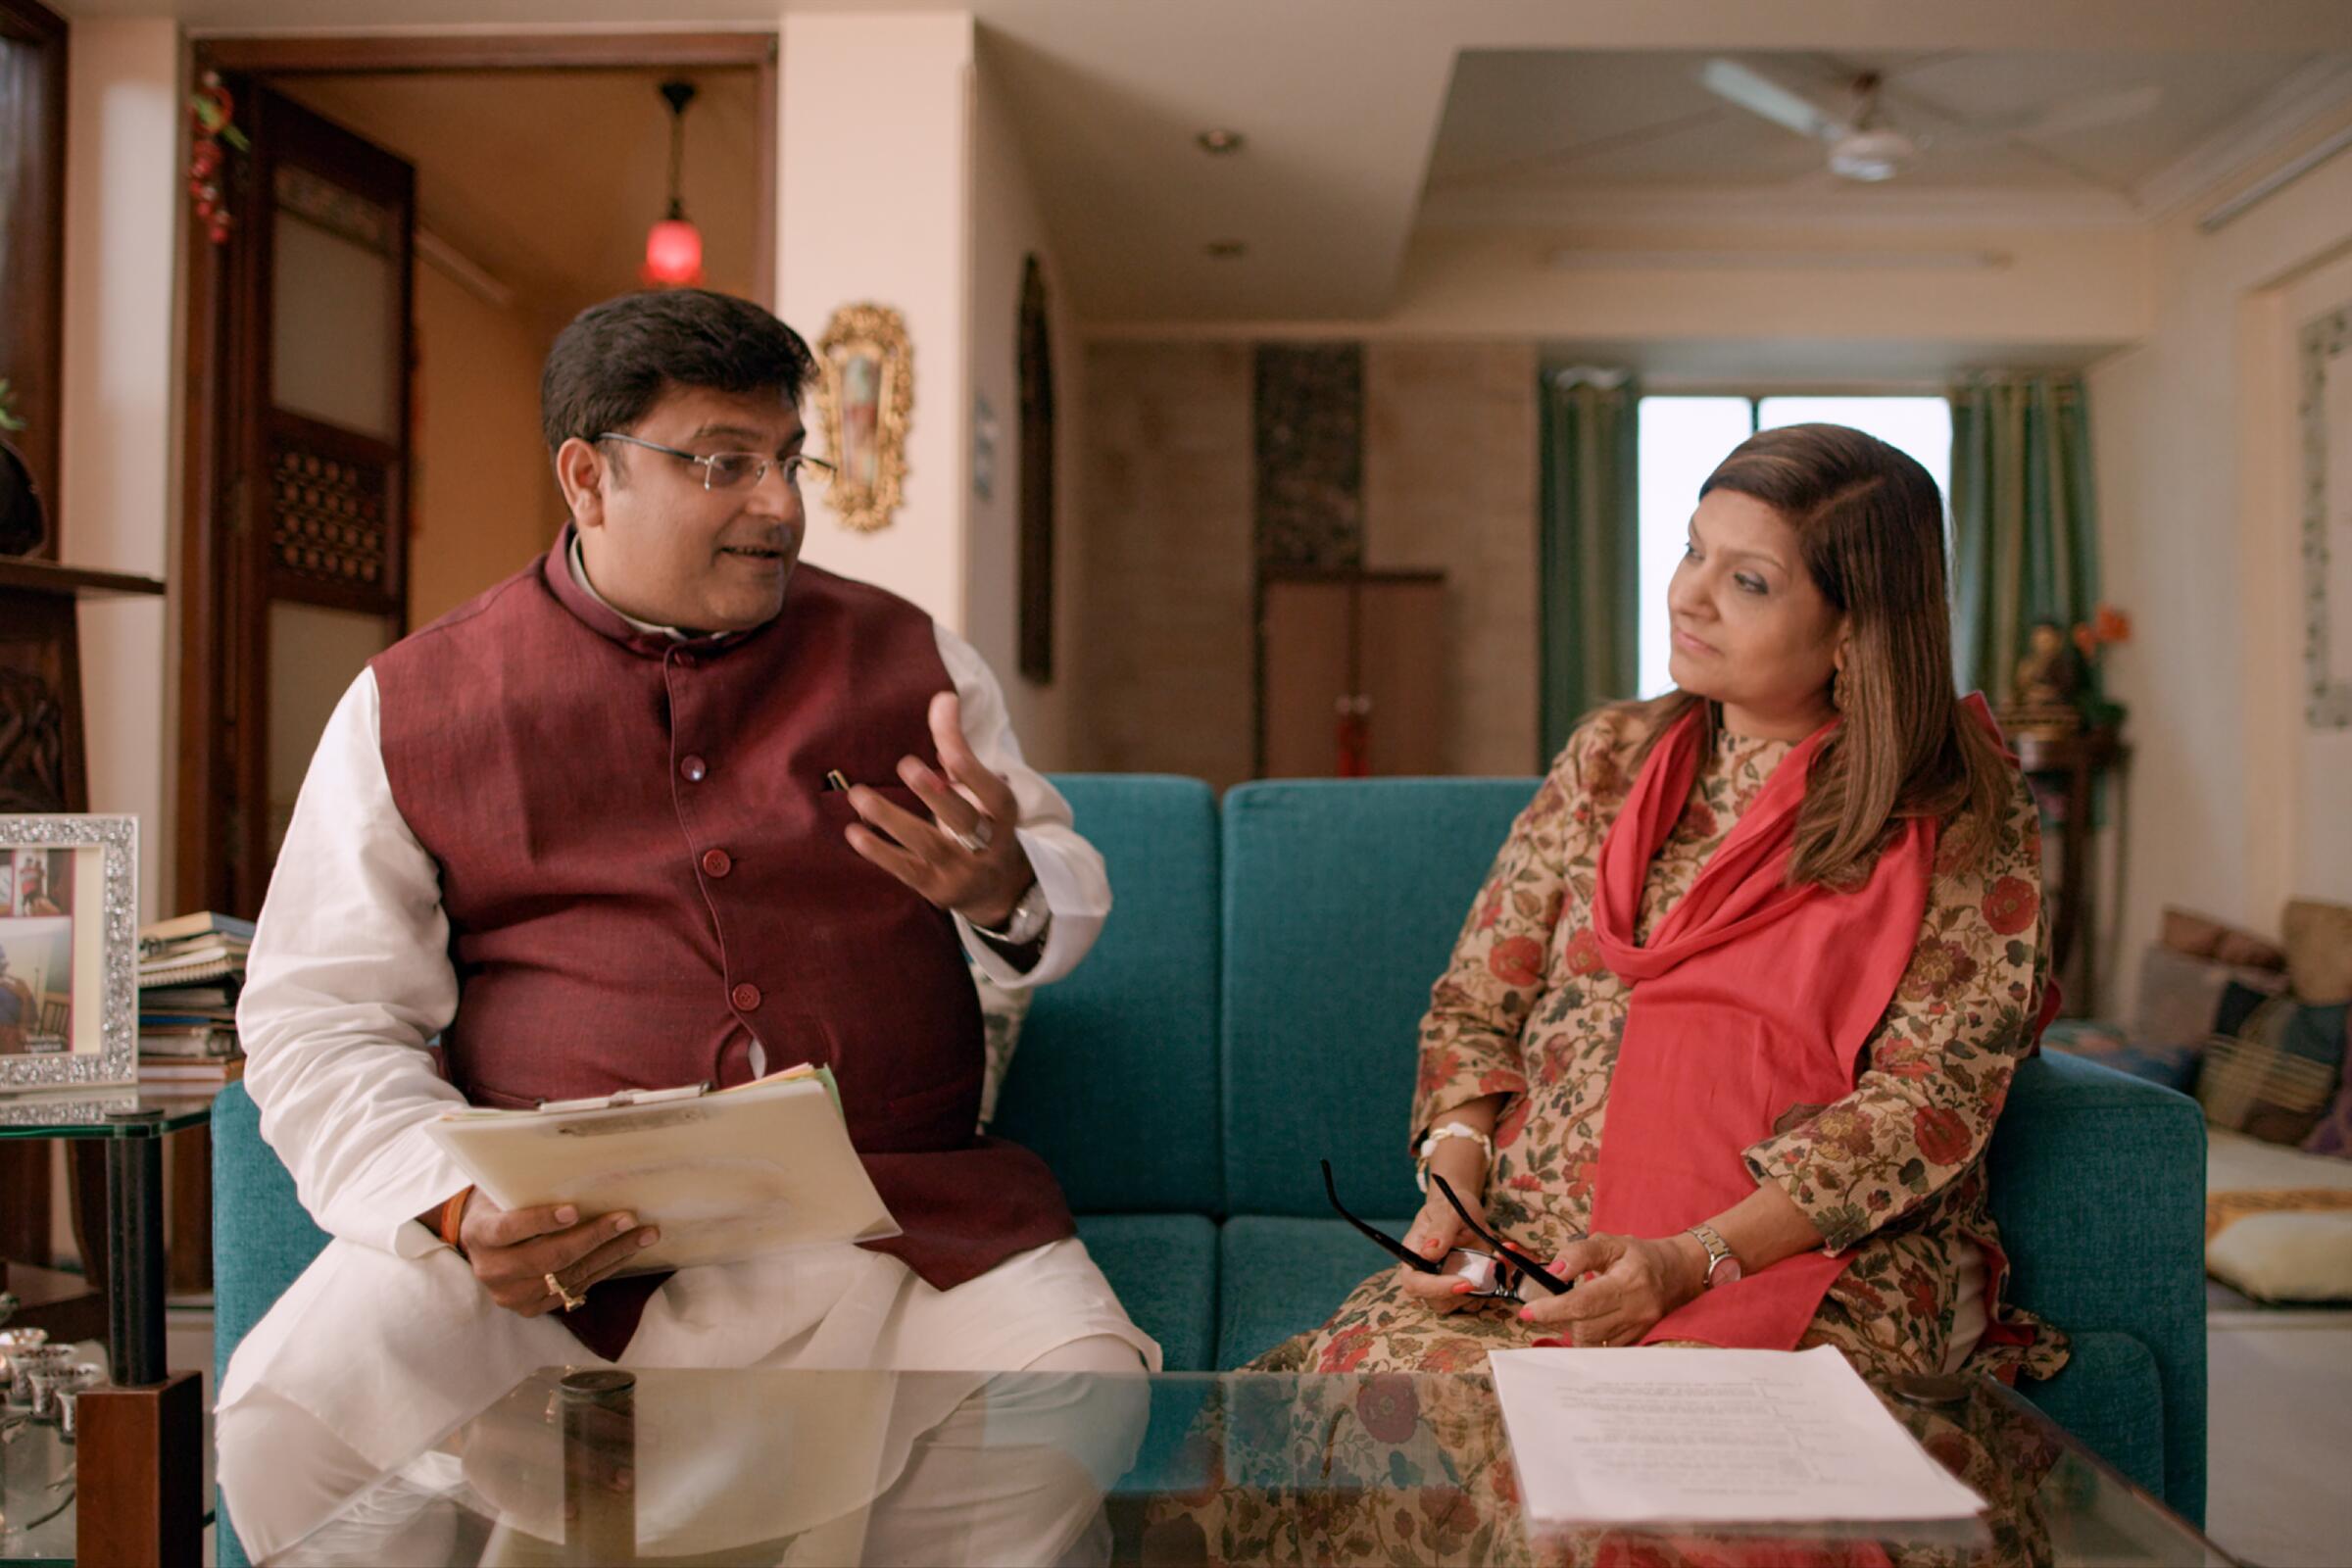 Matchmaker Sima Taparia, right, with astrologer Pundit Sushil-Ji in the Netflix series "Indian Matchmaking."